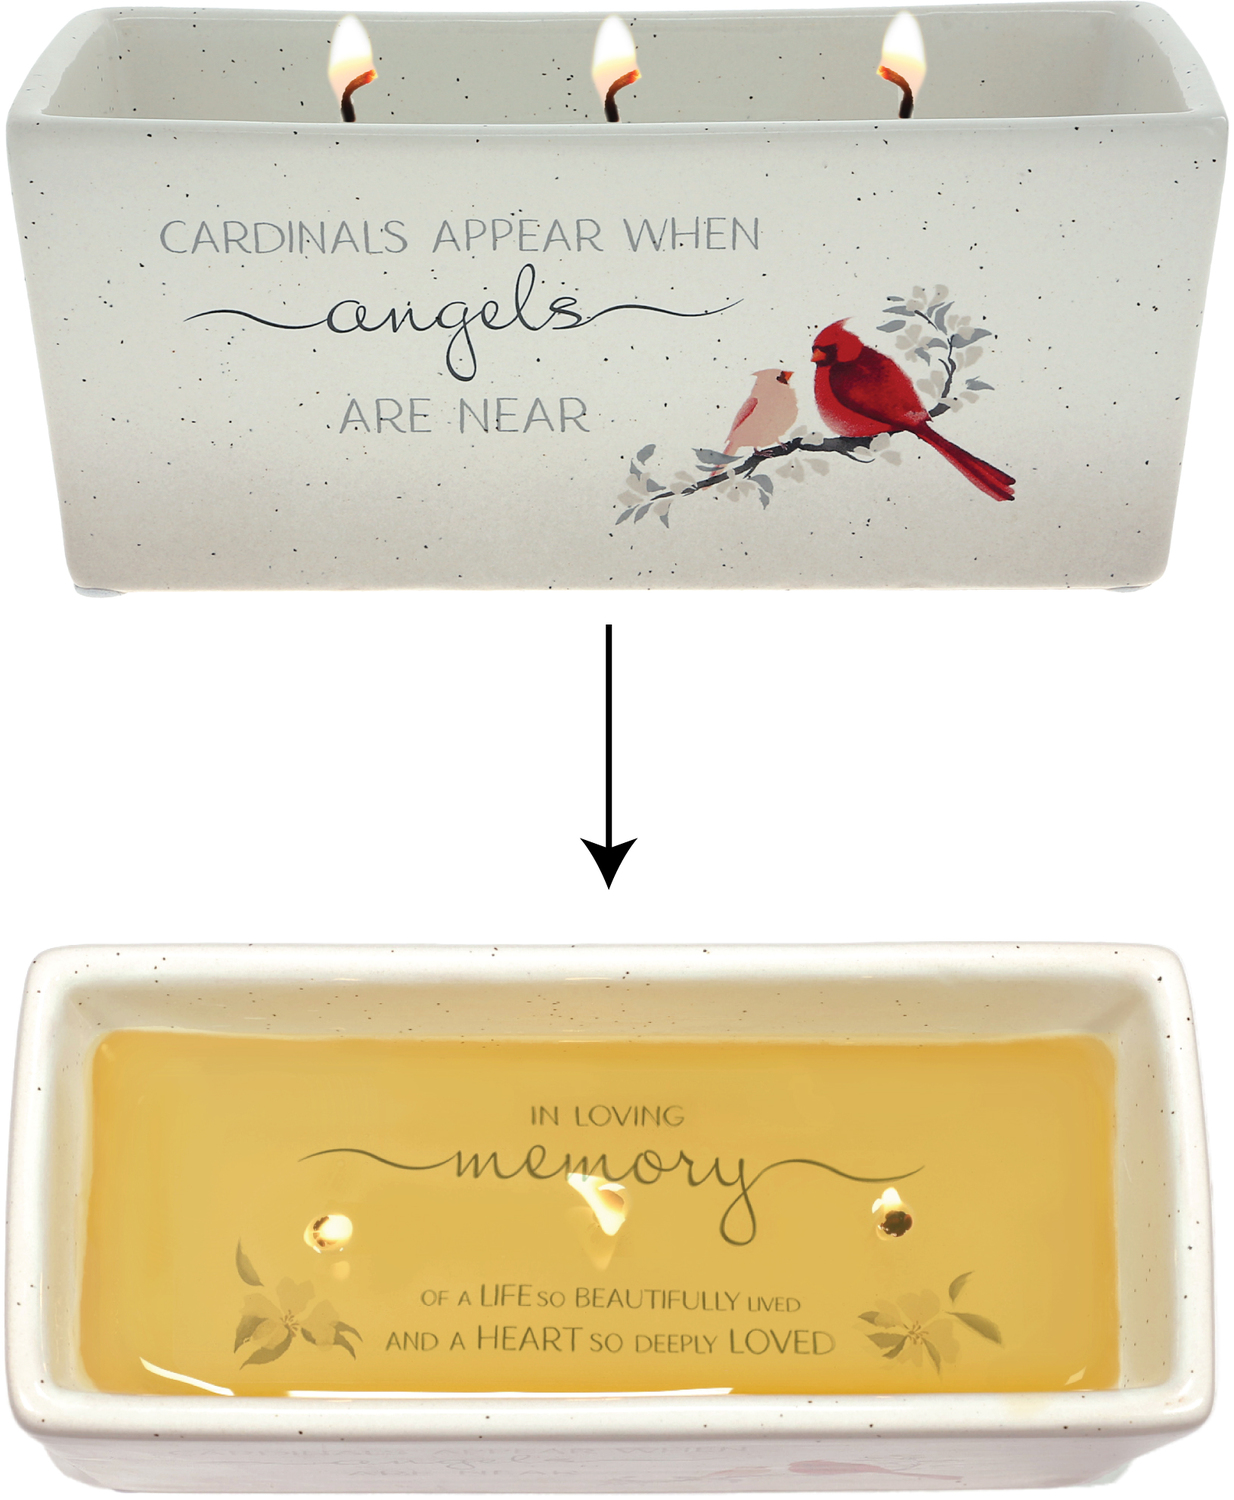 Cardinals Appear by Always by Your Side - Cardinals Appear - 12 oz - 100% Soy Wax Reveal 
Triple Wick Candle
Scent: Tranquility